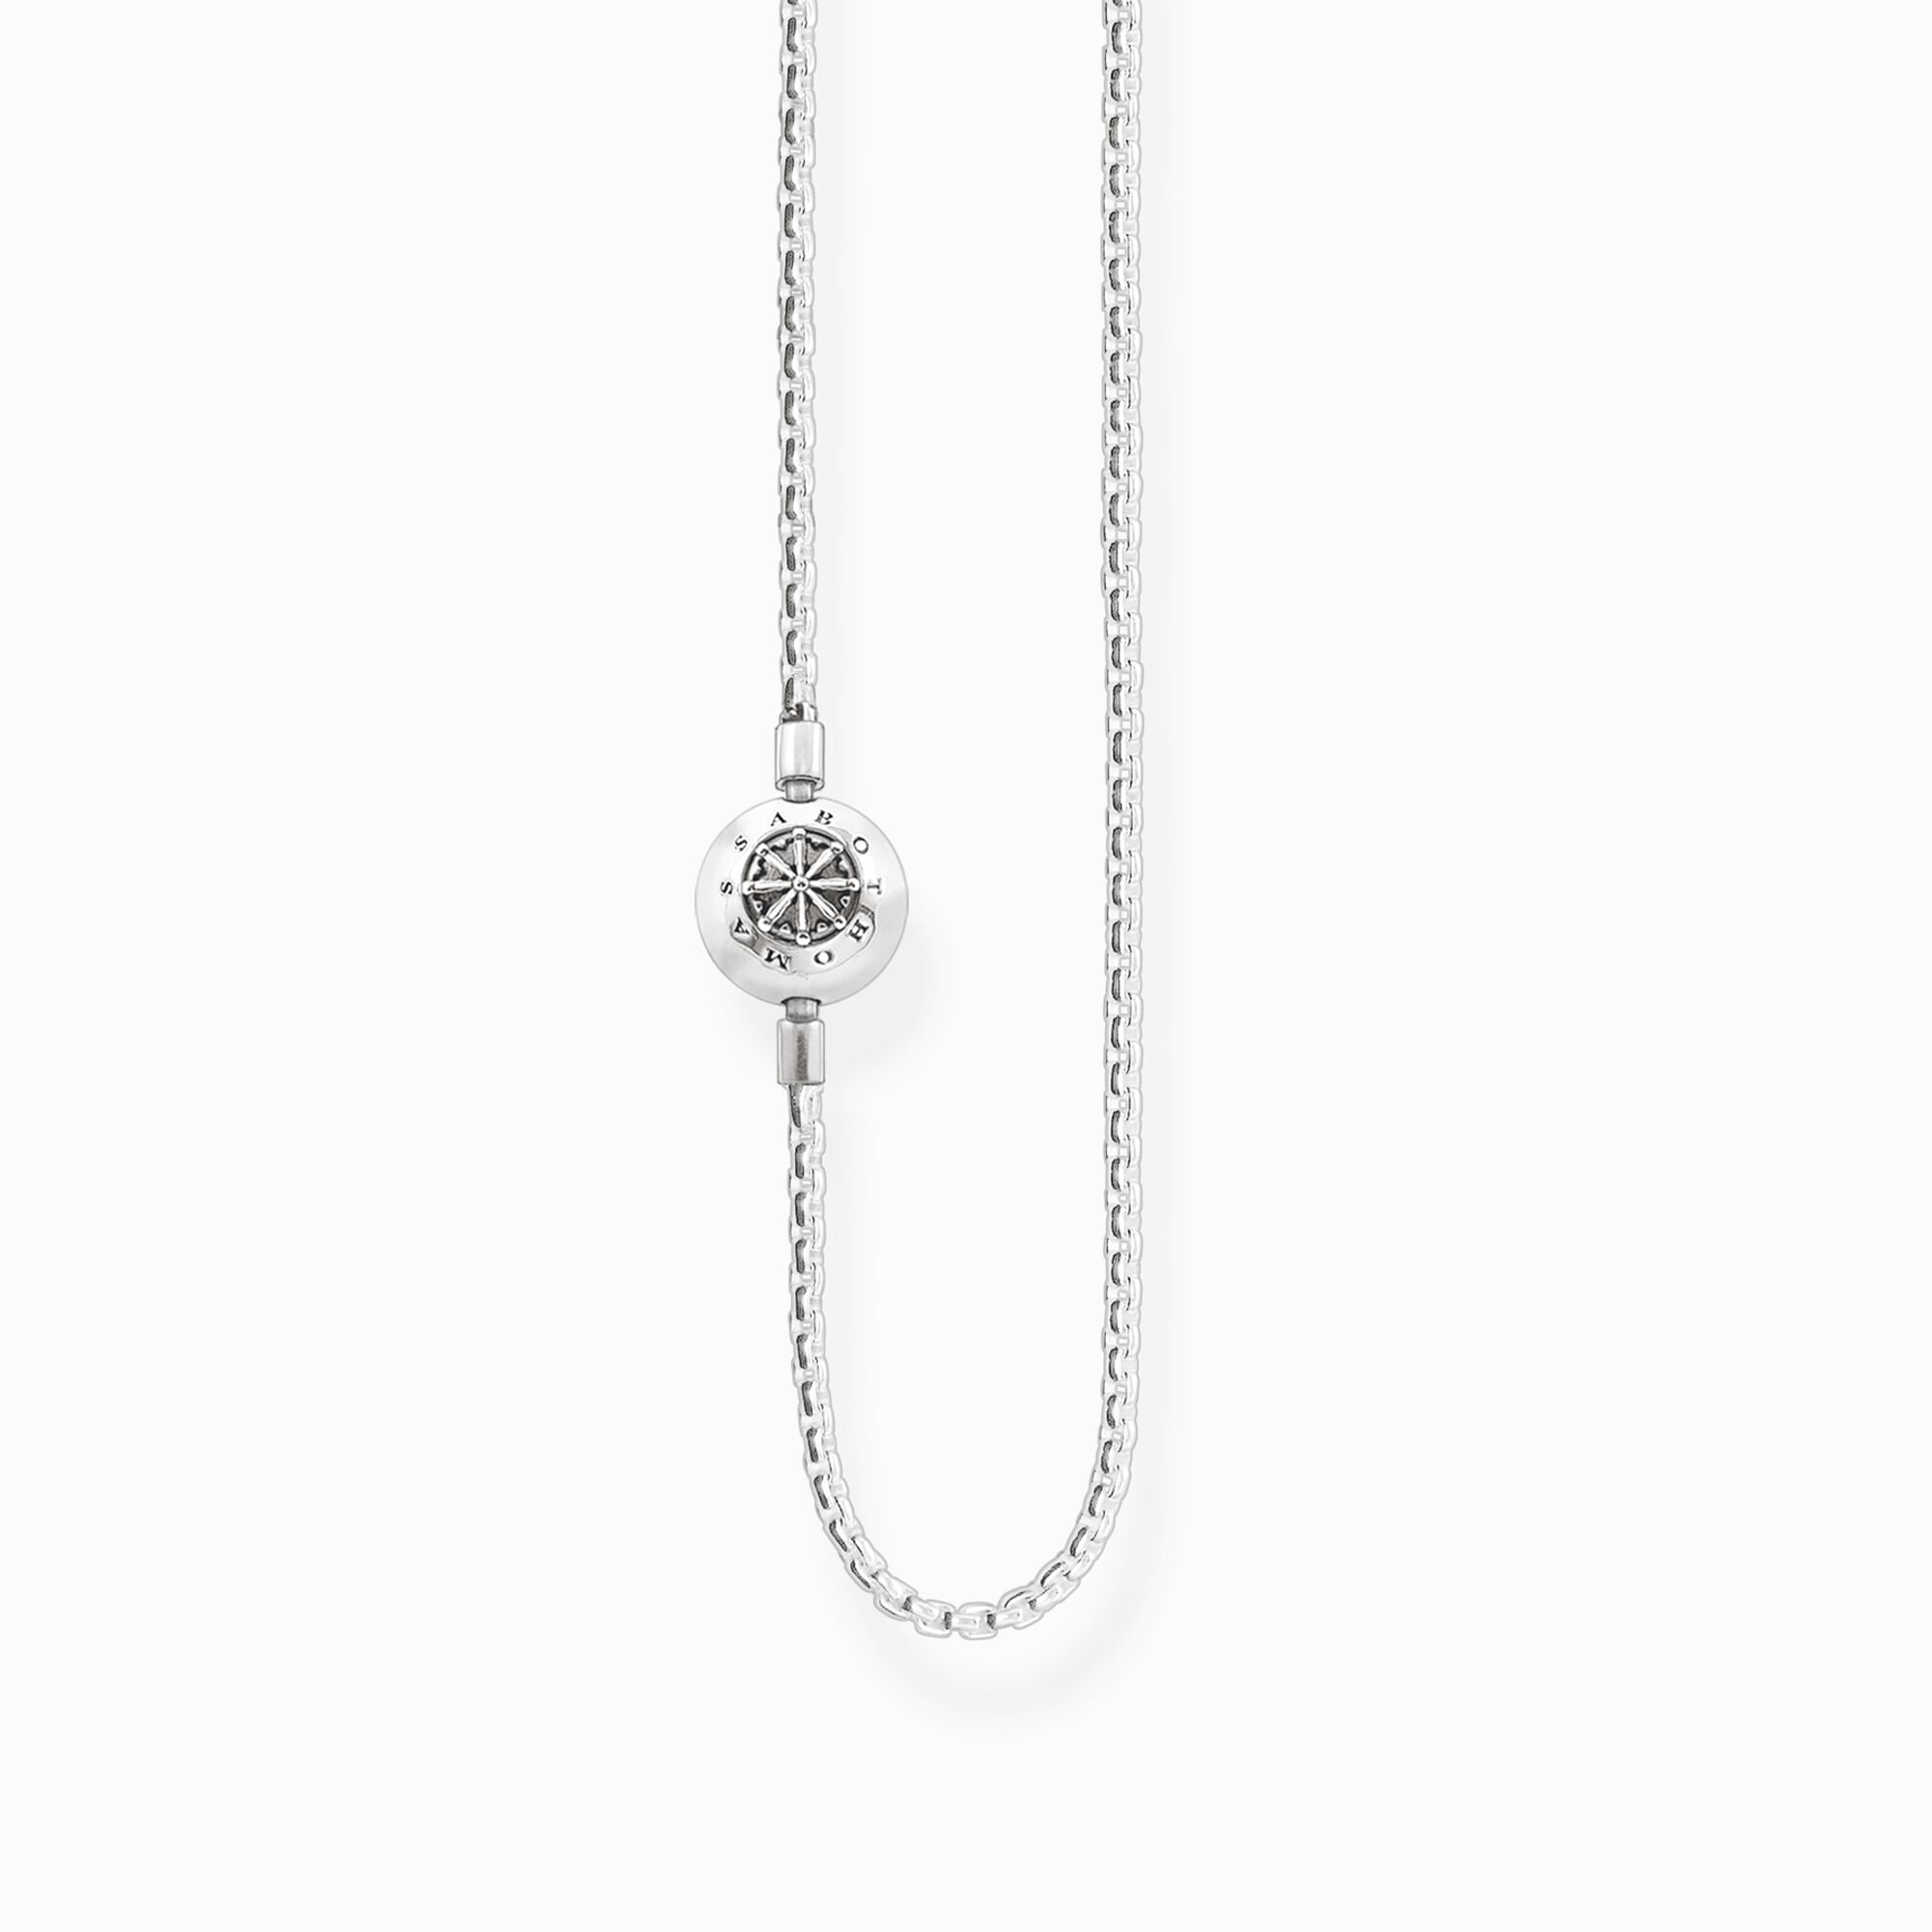 Necklace for Beads from the Karma Beads collection in the THOMAS SABO online store